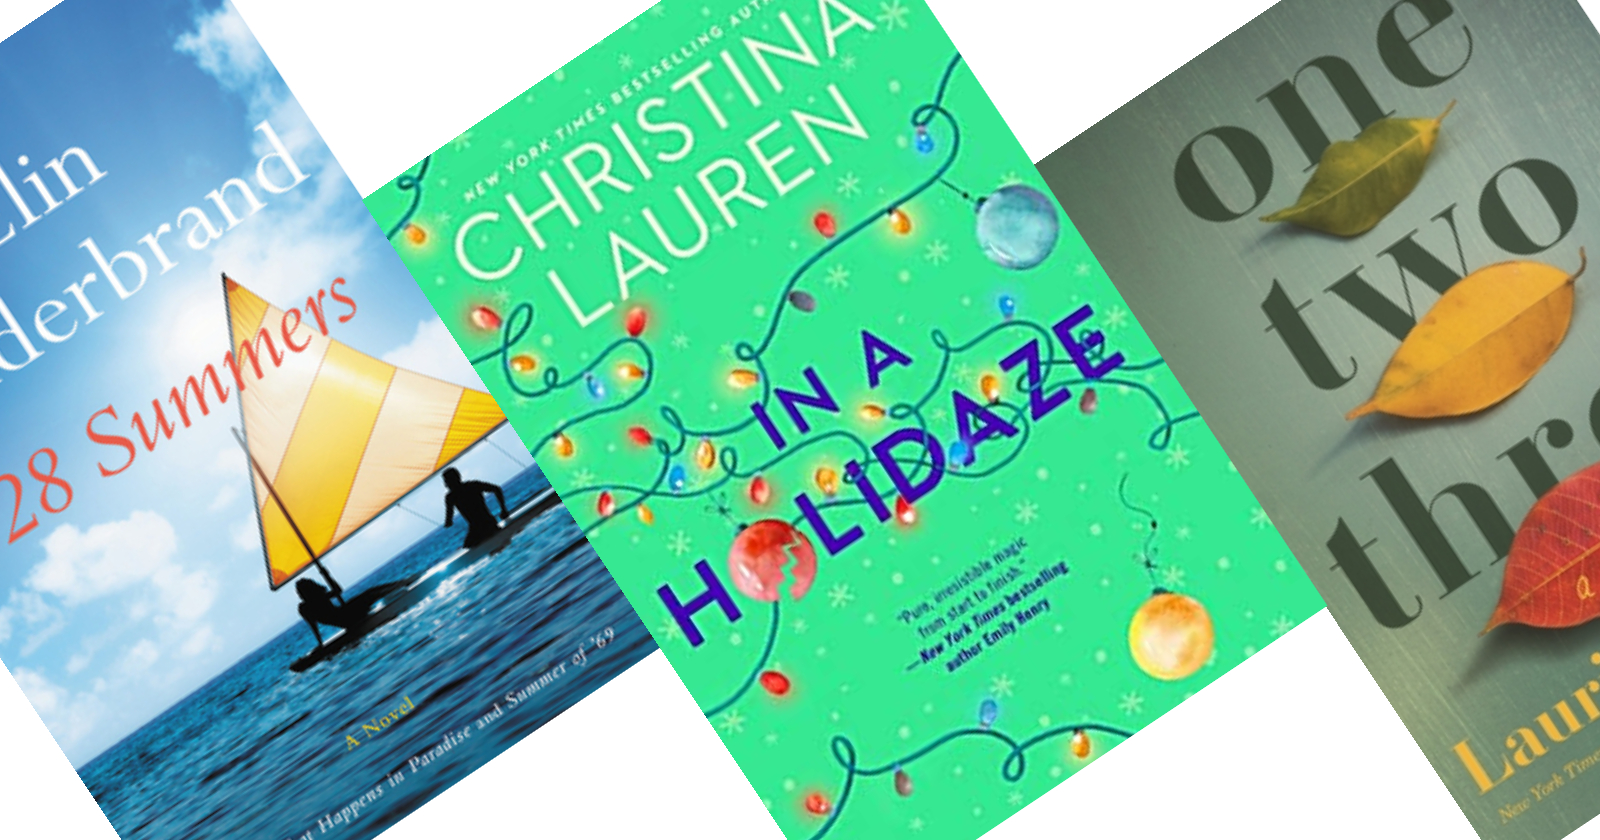 Three tilted book covers - center image has a bright green background with the title In a Holidaze.